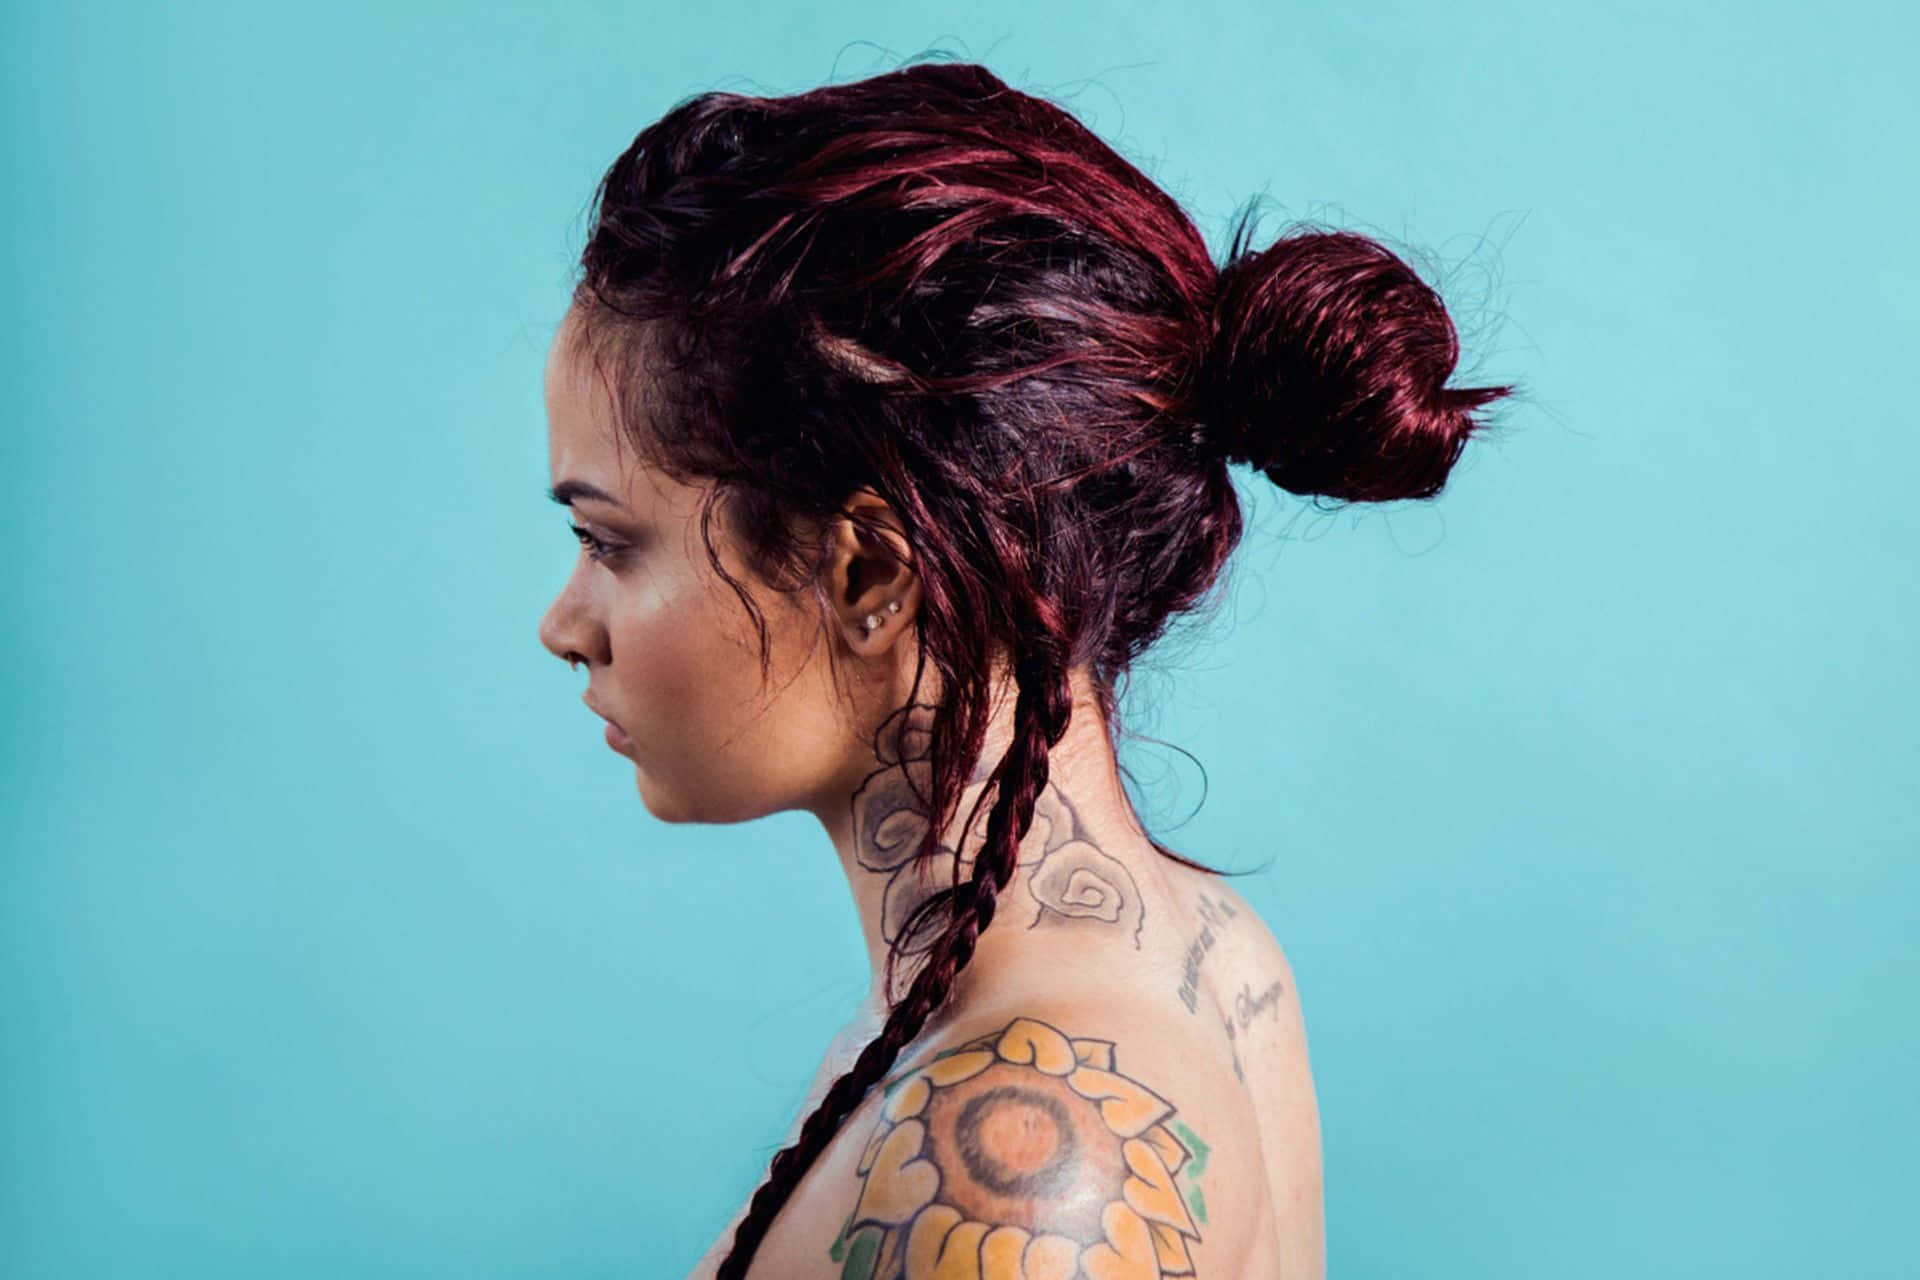 Kehlani Brings Her Vibrant Style To The Stage